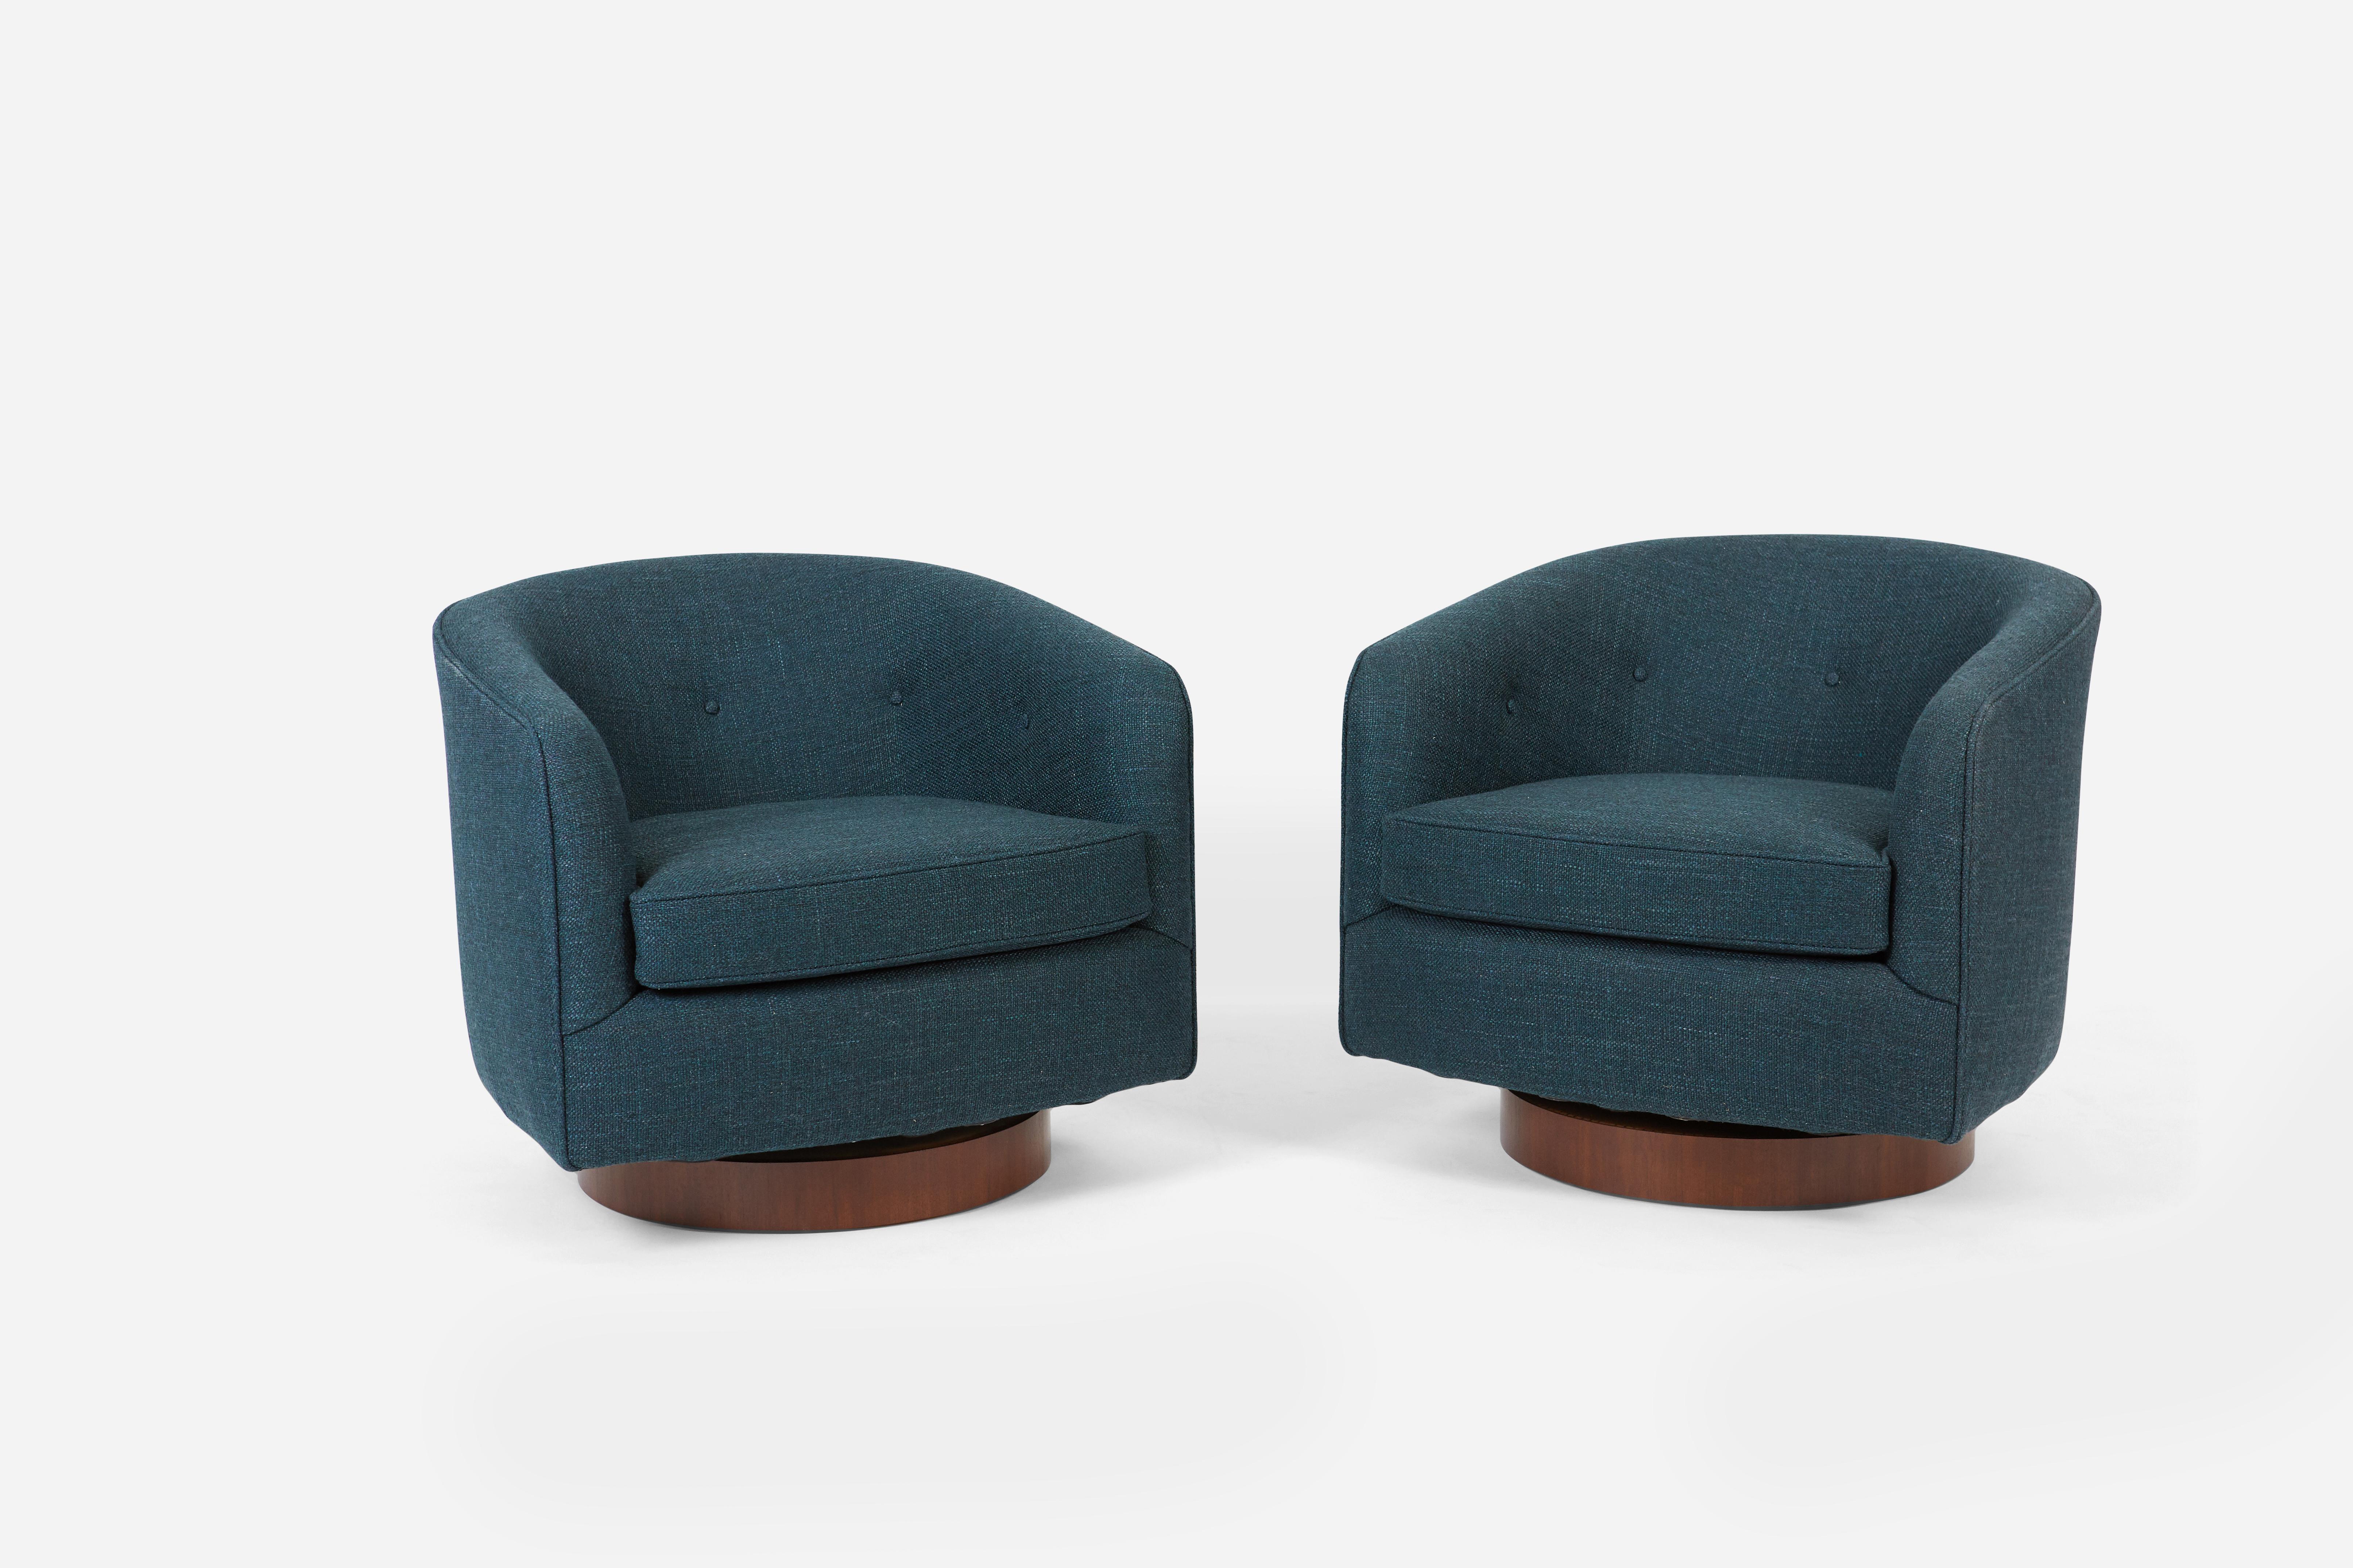 Pair of swivel chairs by Milo Baughman. Fully restored. New upholstery over refinished walnut bases.